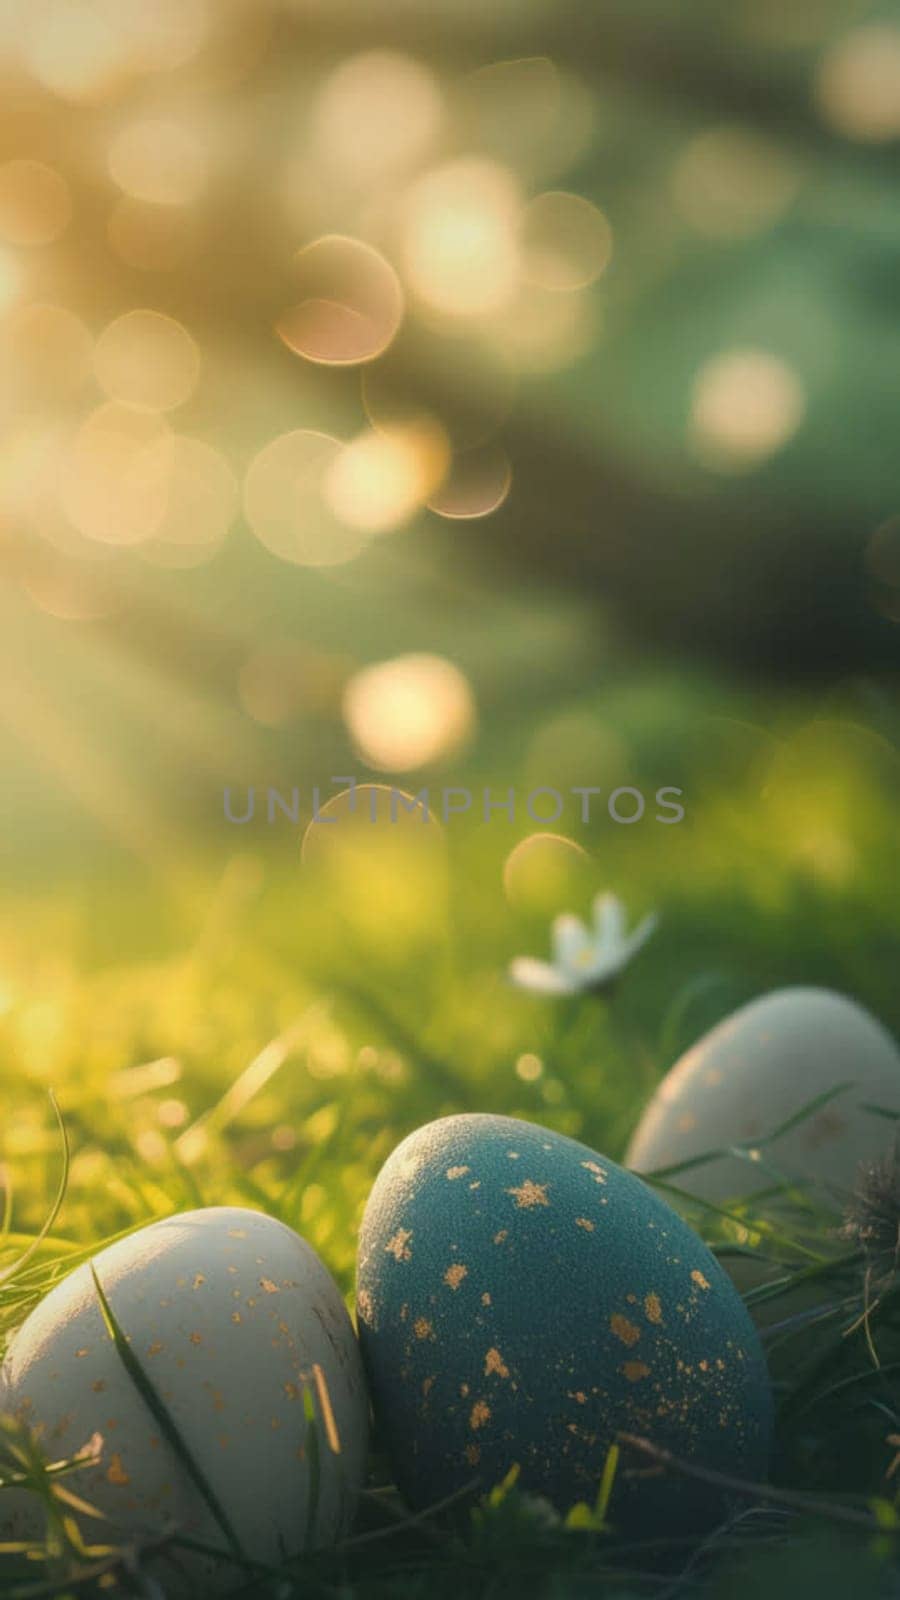 Green festive background for Easter holiday with eggs